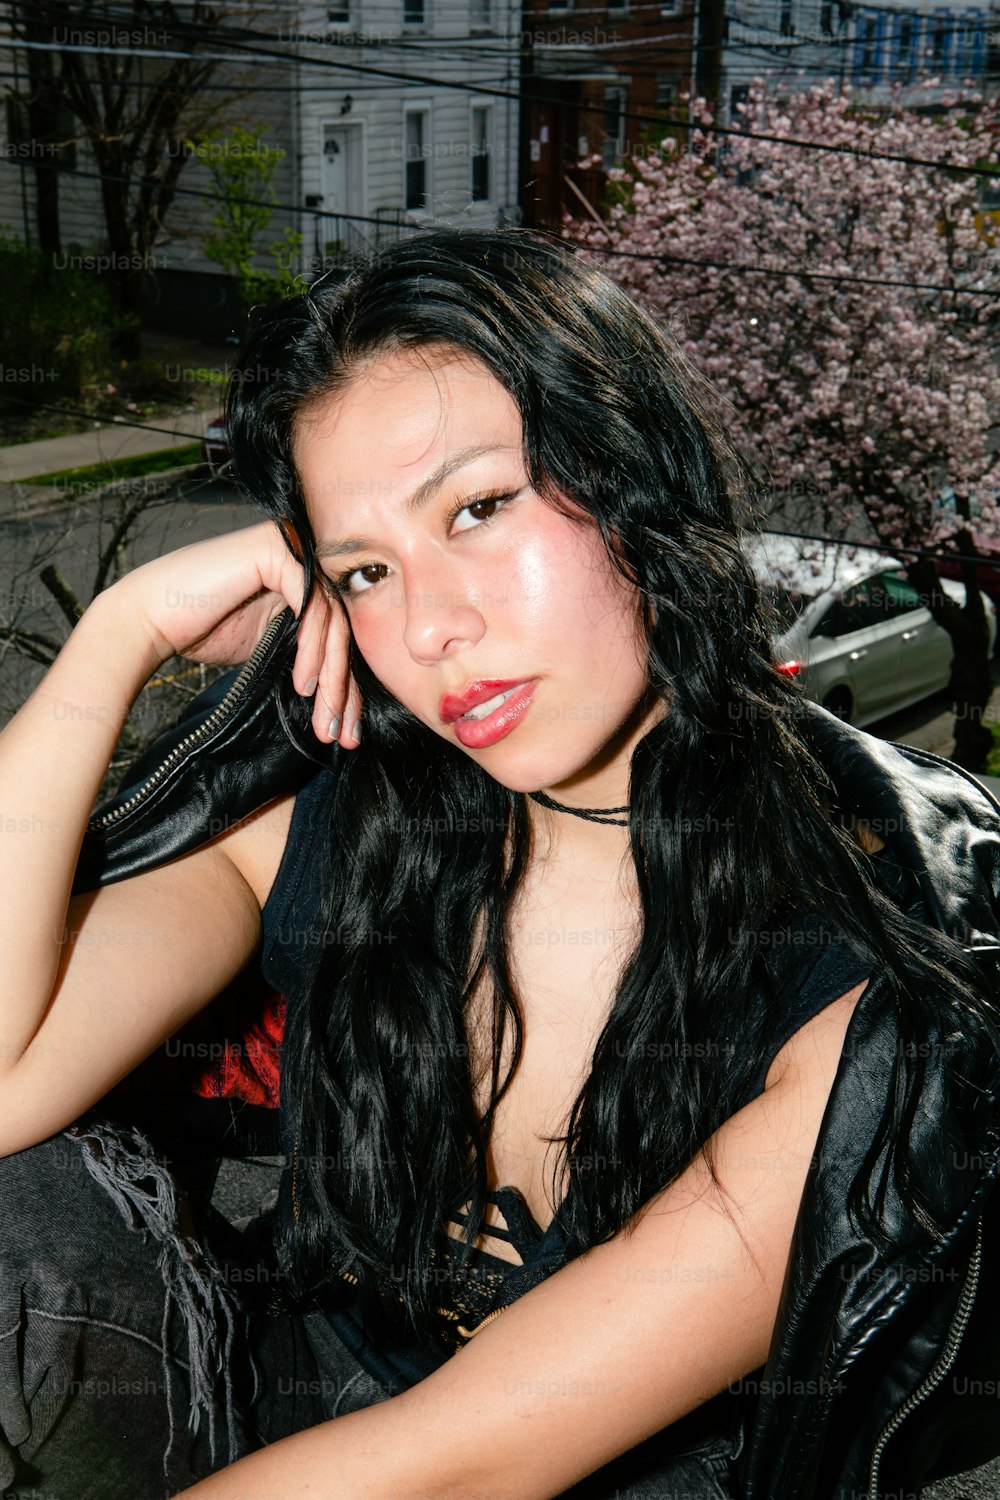 a woman with long black hair sitting on a motorcycle